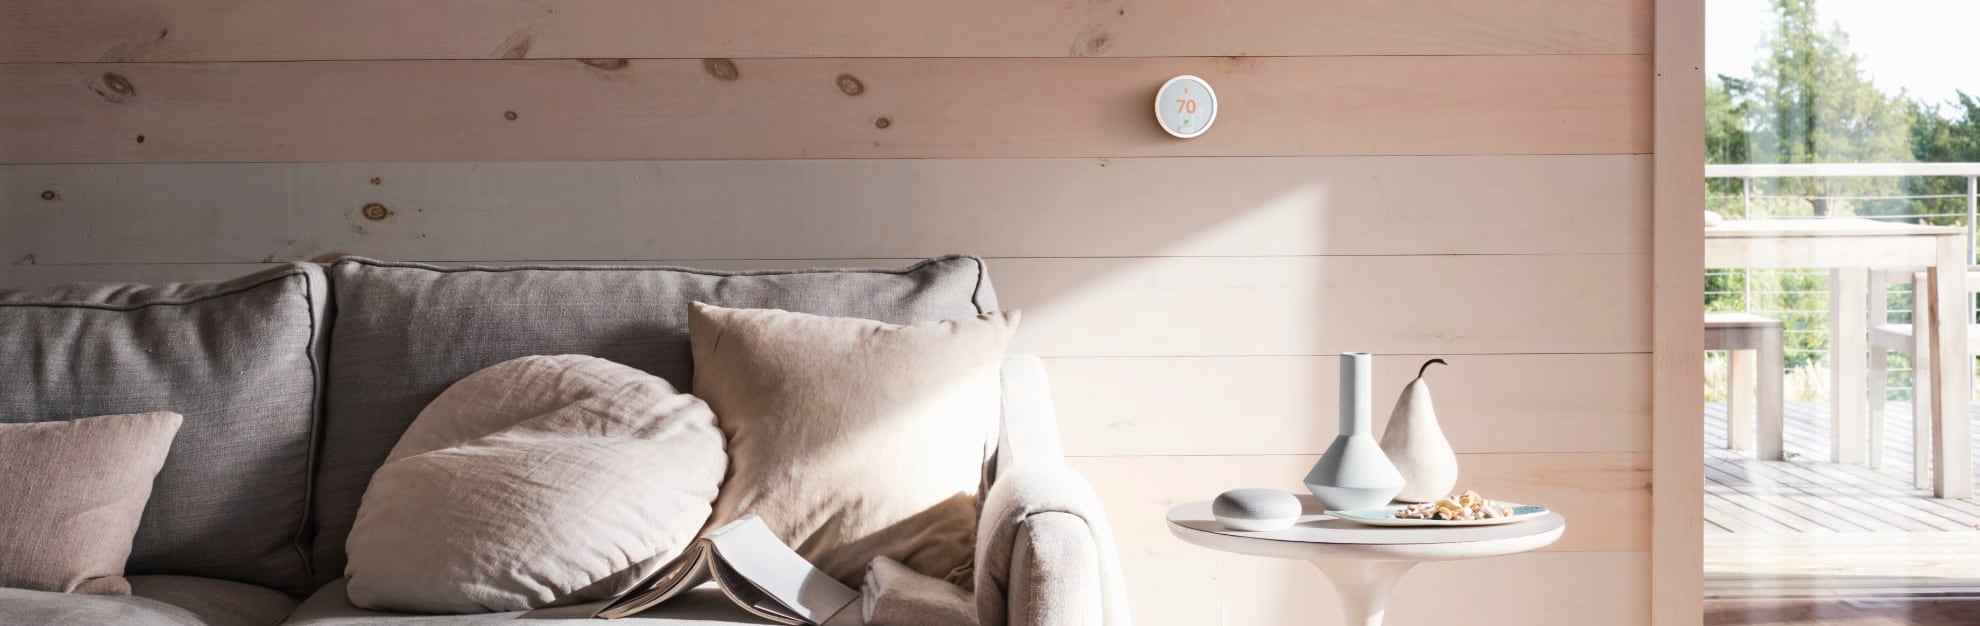 Vivint Home Automation in Evansville